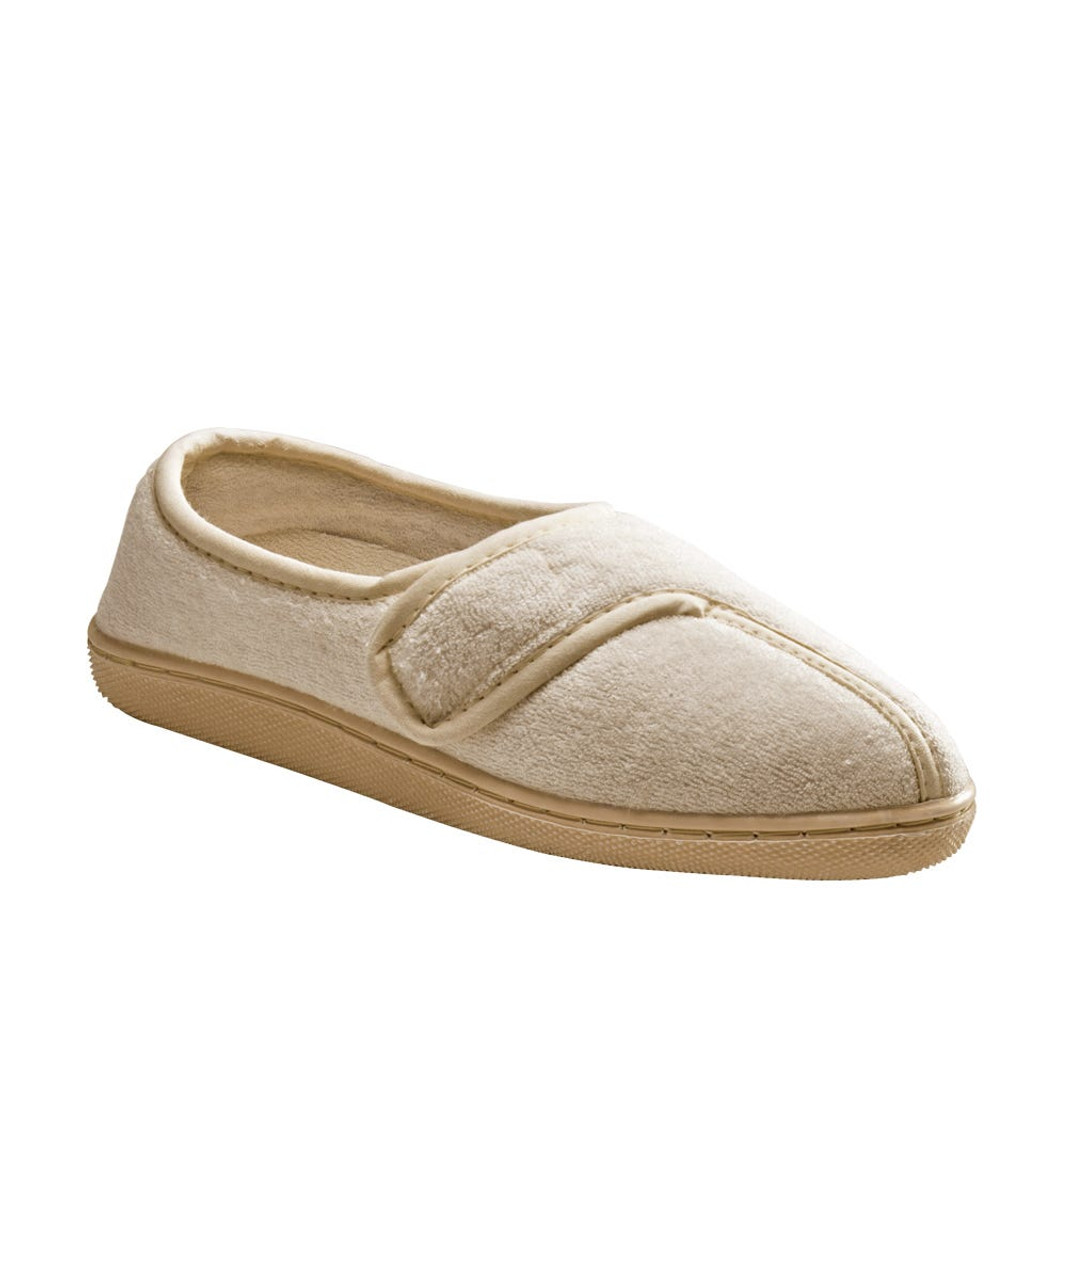 Silverts SV10360 Soft Terry Cloth Slippers Taupe, Size=XL, SV10360-SV44-XL